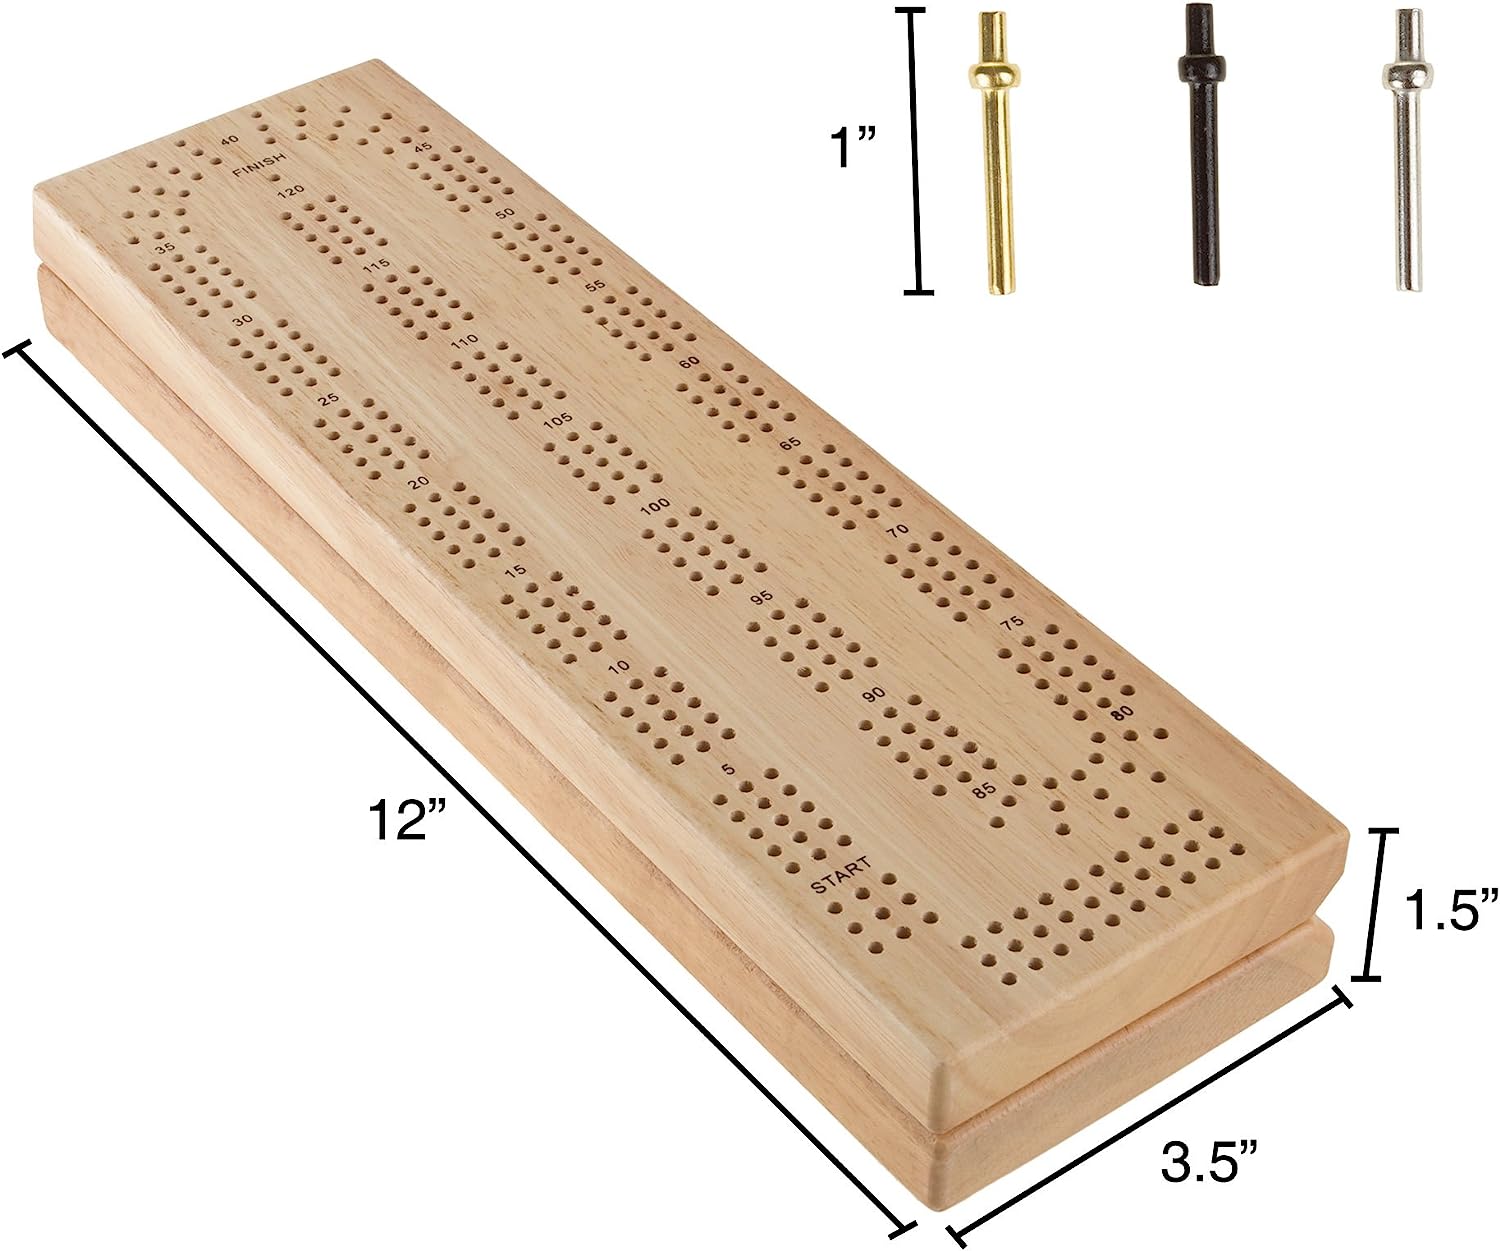 Wood Cribbage Board Game Set- Complete Set With Playing Cards, Pegs, Wood Board and Storage Area for Adults and Kids, Boys and Girls by